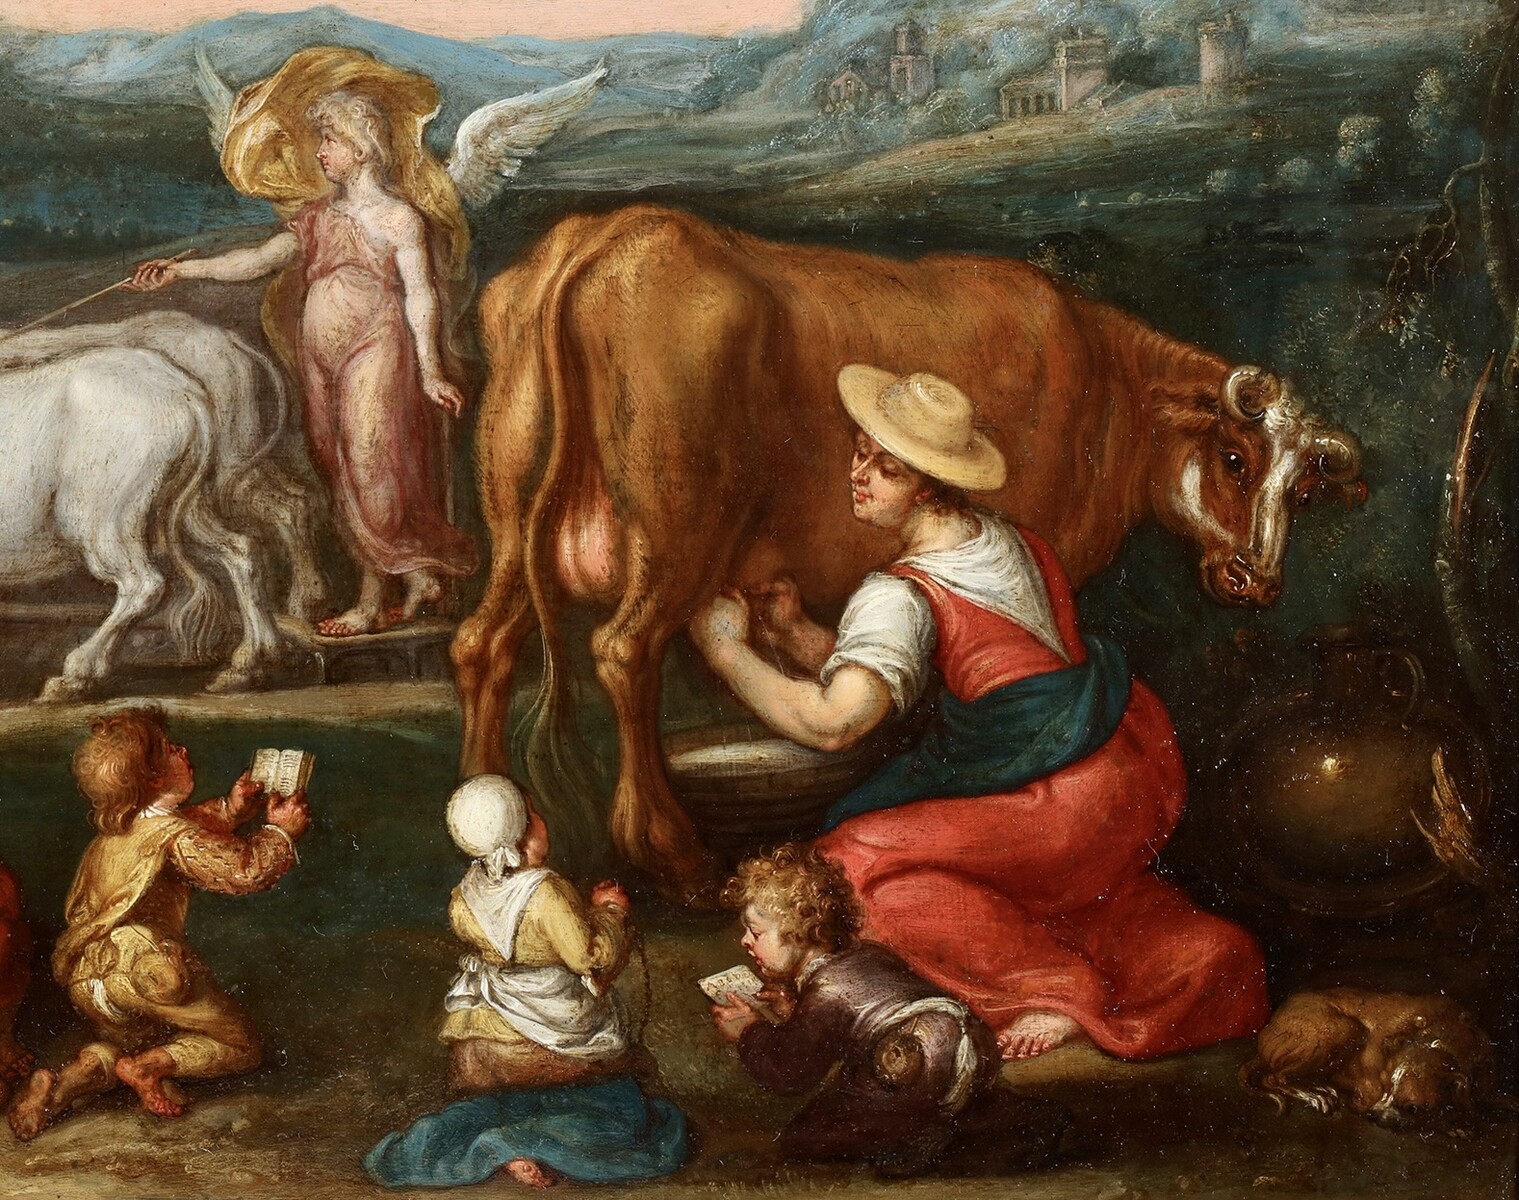 The miracle of Saint Isidore the Farmer